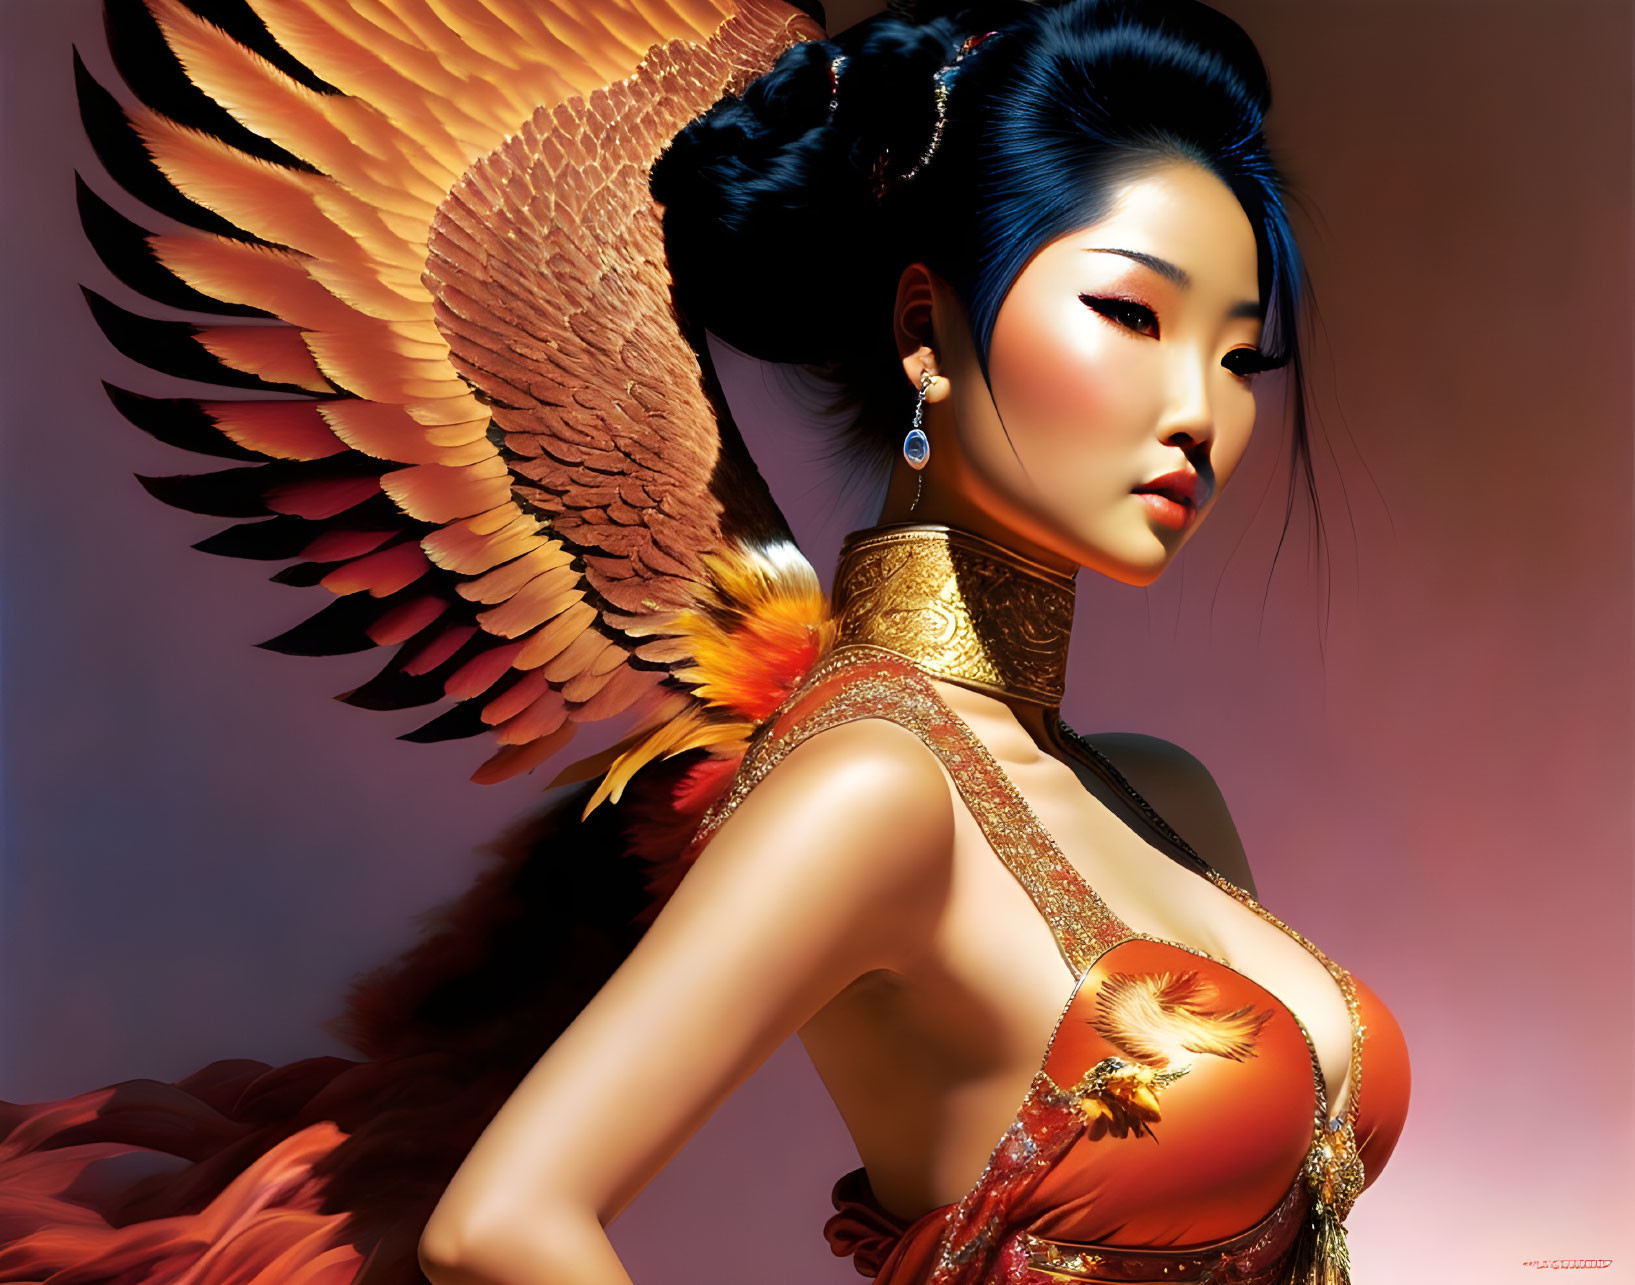 Digital artwork: Woman with winged shoulders in red-gold dress